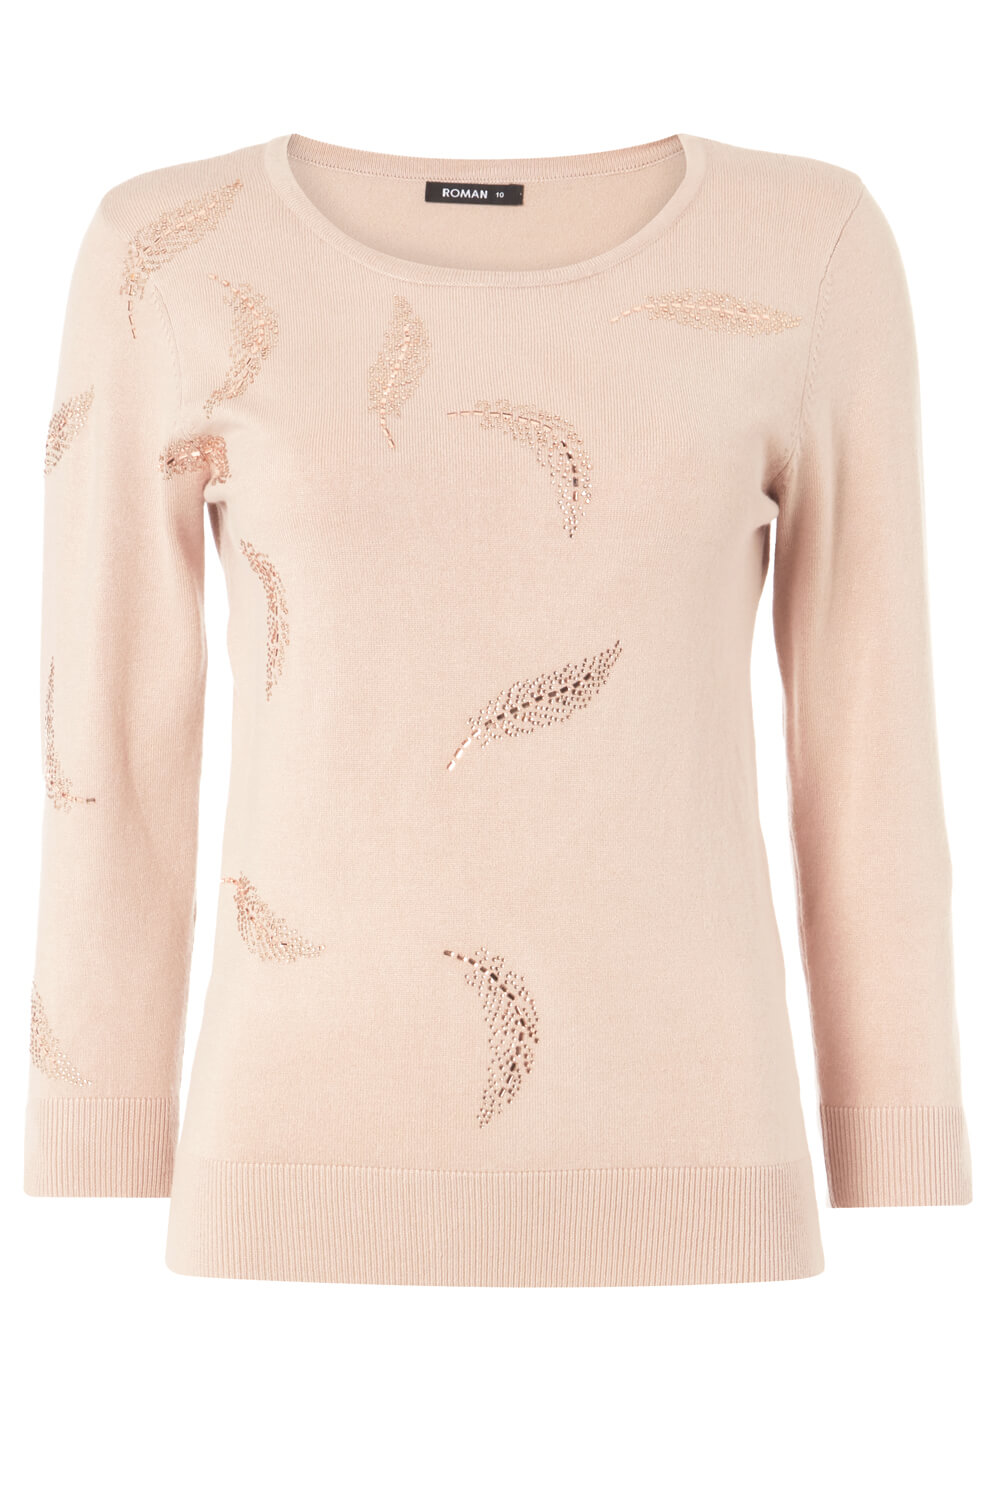 Light Pink Feather Hotfix 3/4 Length Sleeve Jumper, Image 4 of 4